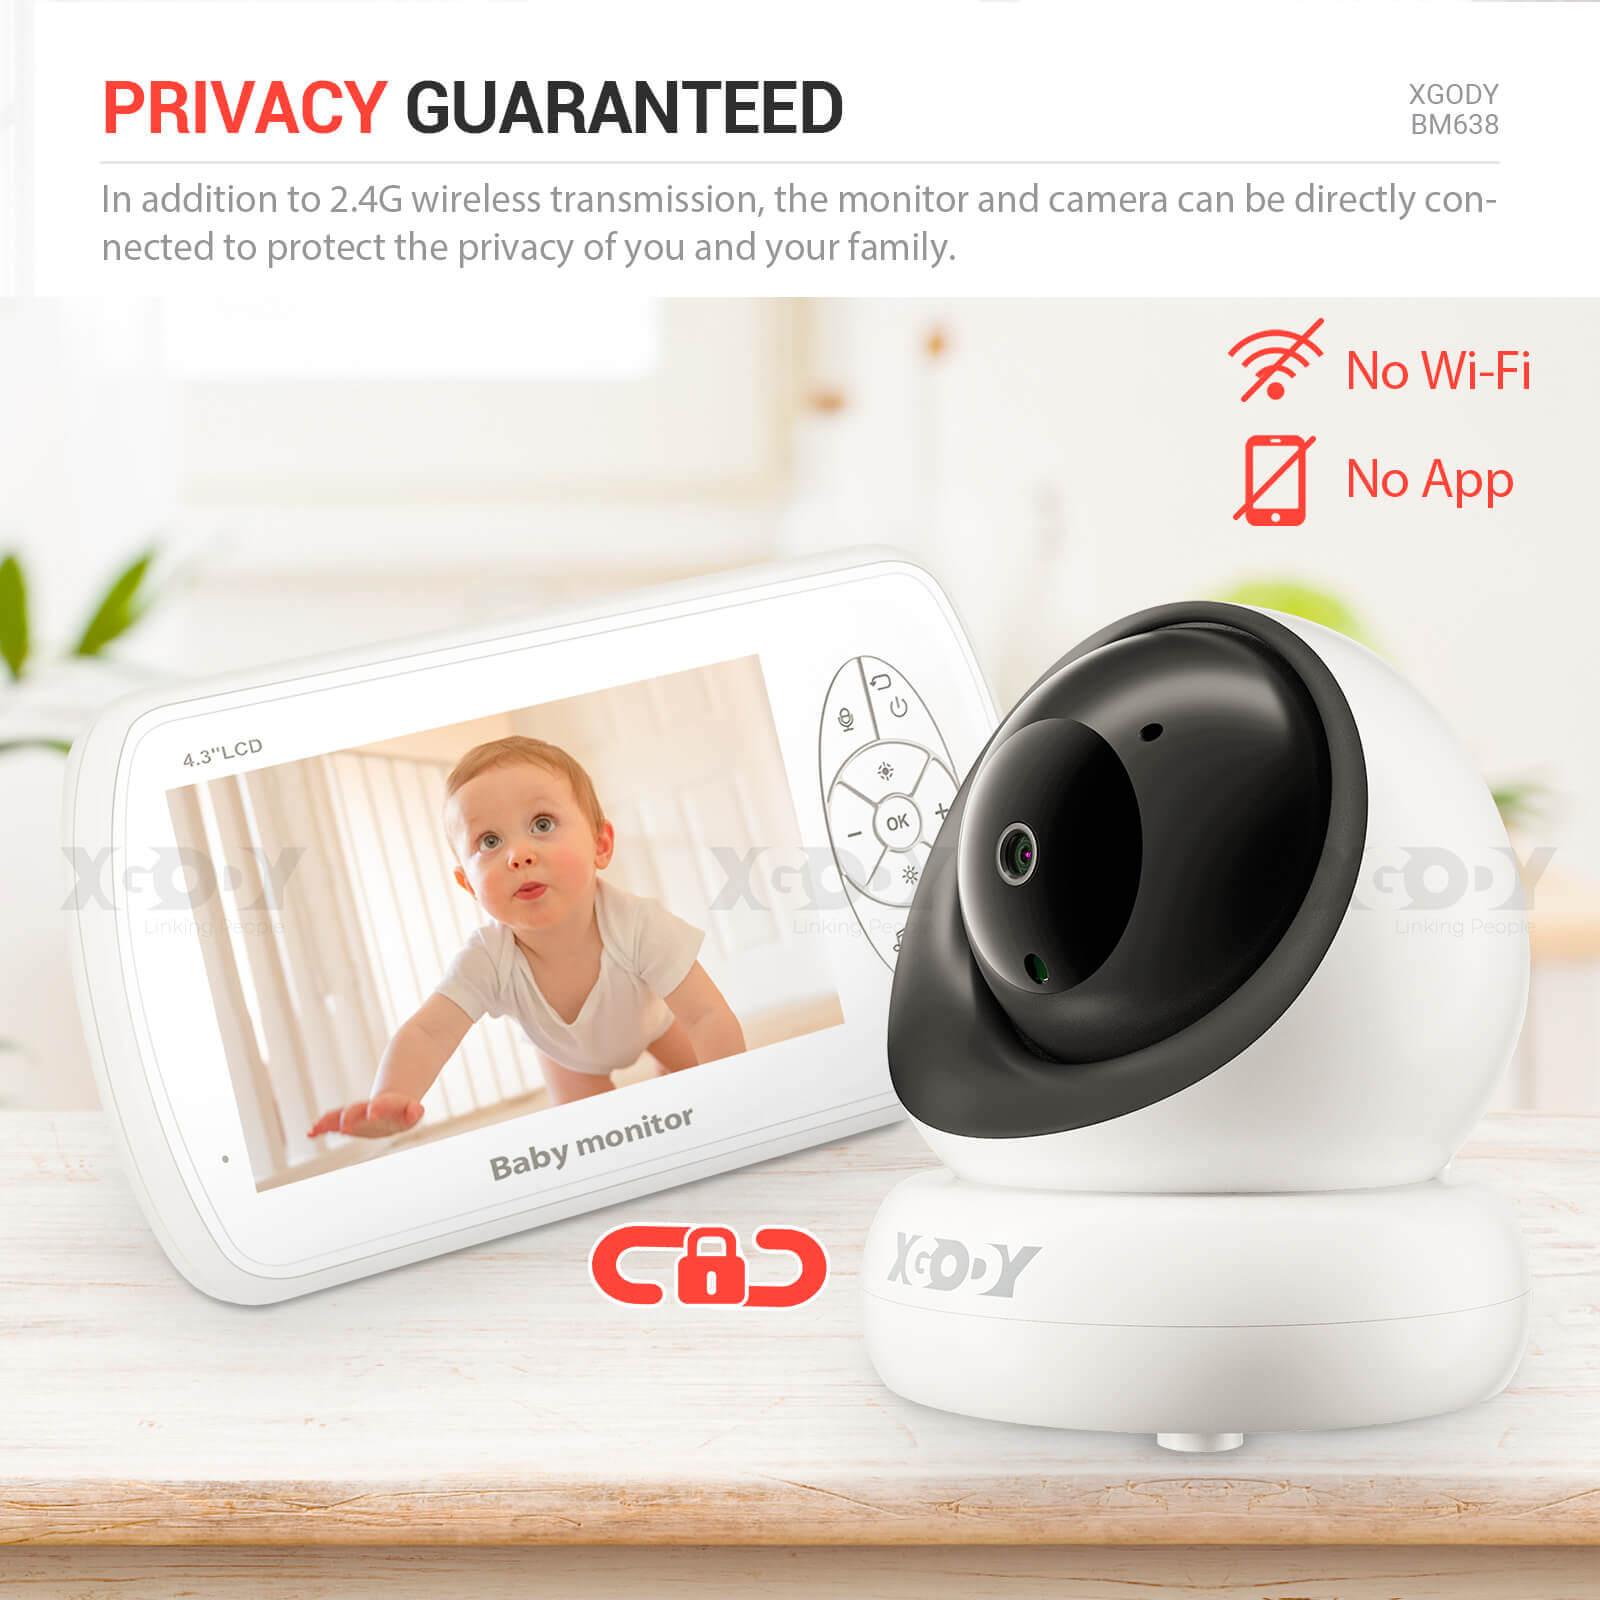 Cost-effective and Most worthwhile XGODY Smart 1080P Baby Monitor BM638 with 4.3” LCD Screen, Lullabies, Two Way Audio - XGODY 